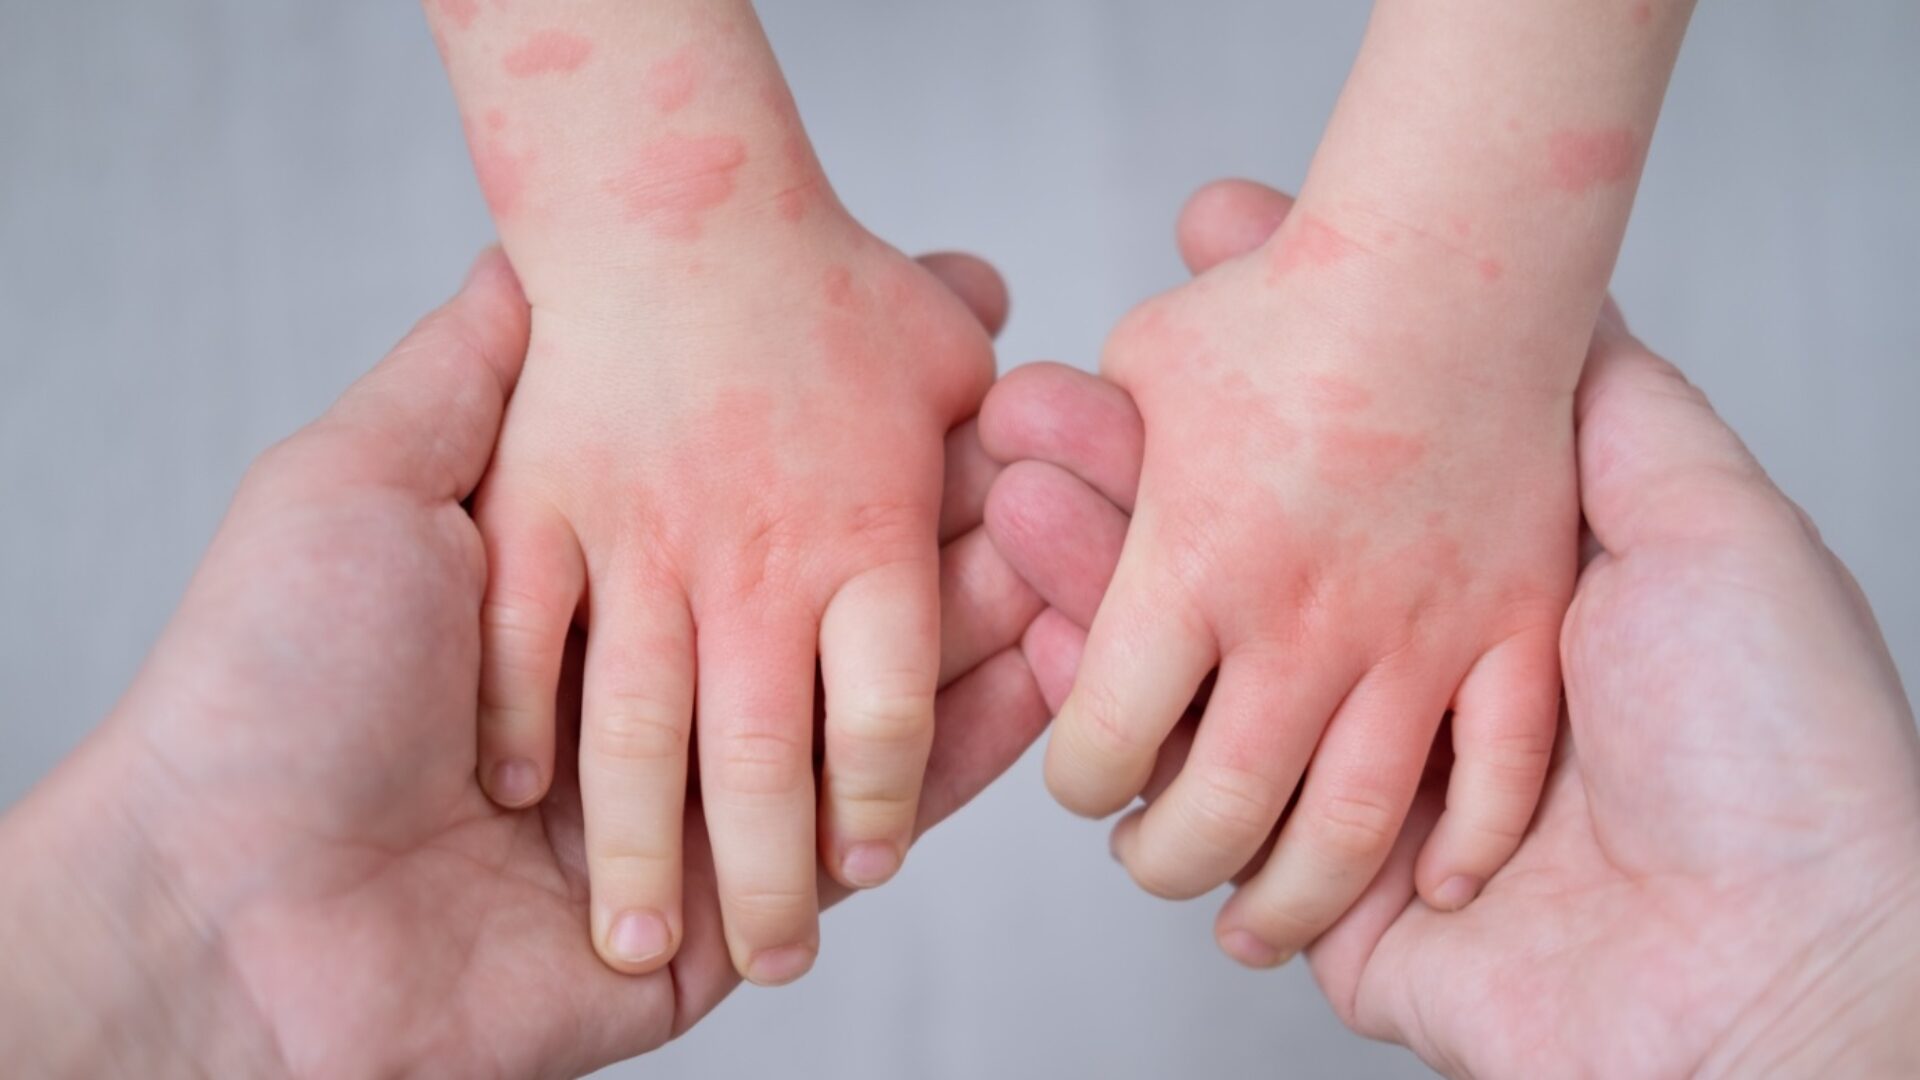 Scratching and crying: the visible signs of eczema